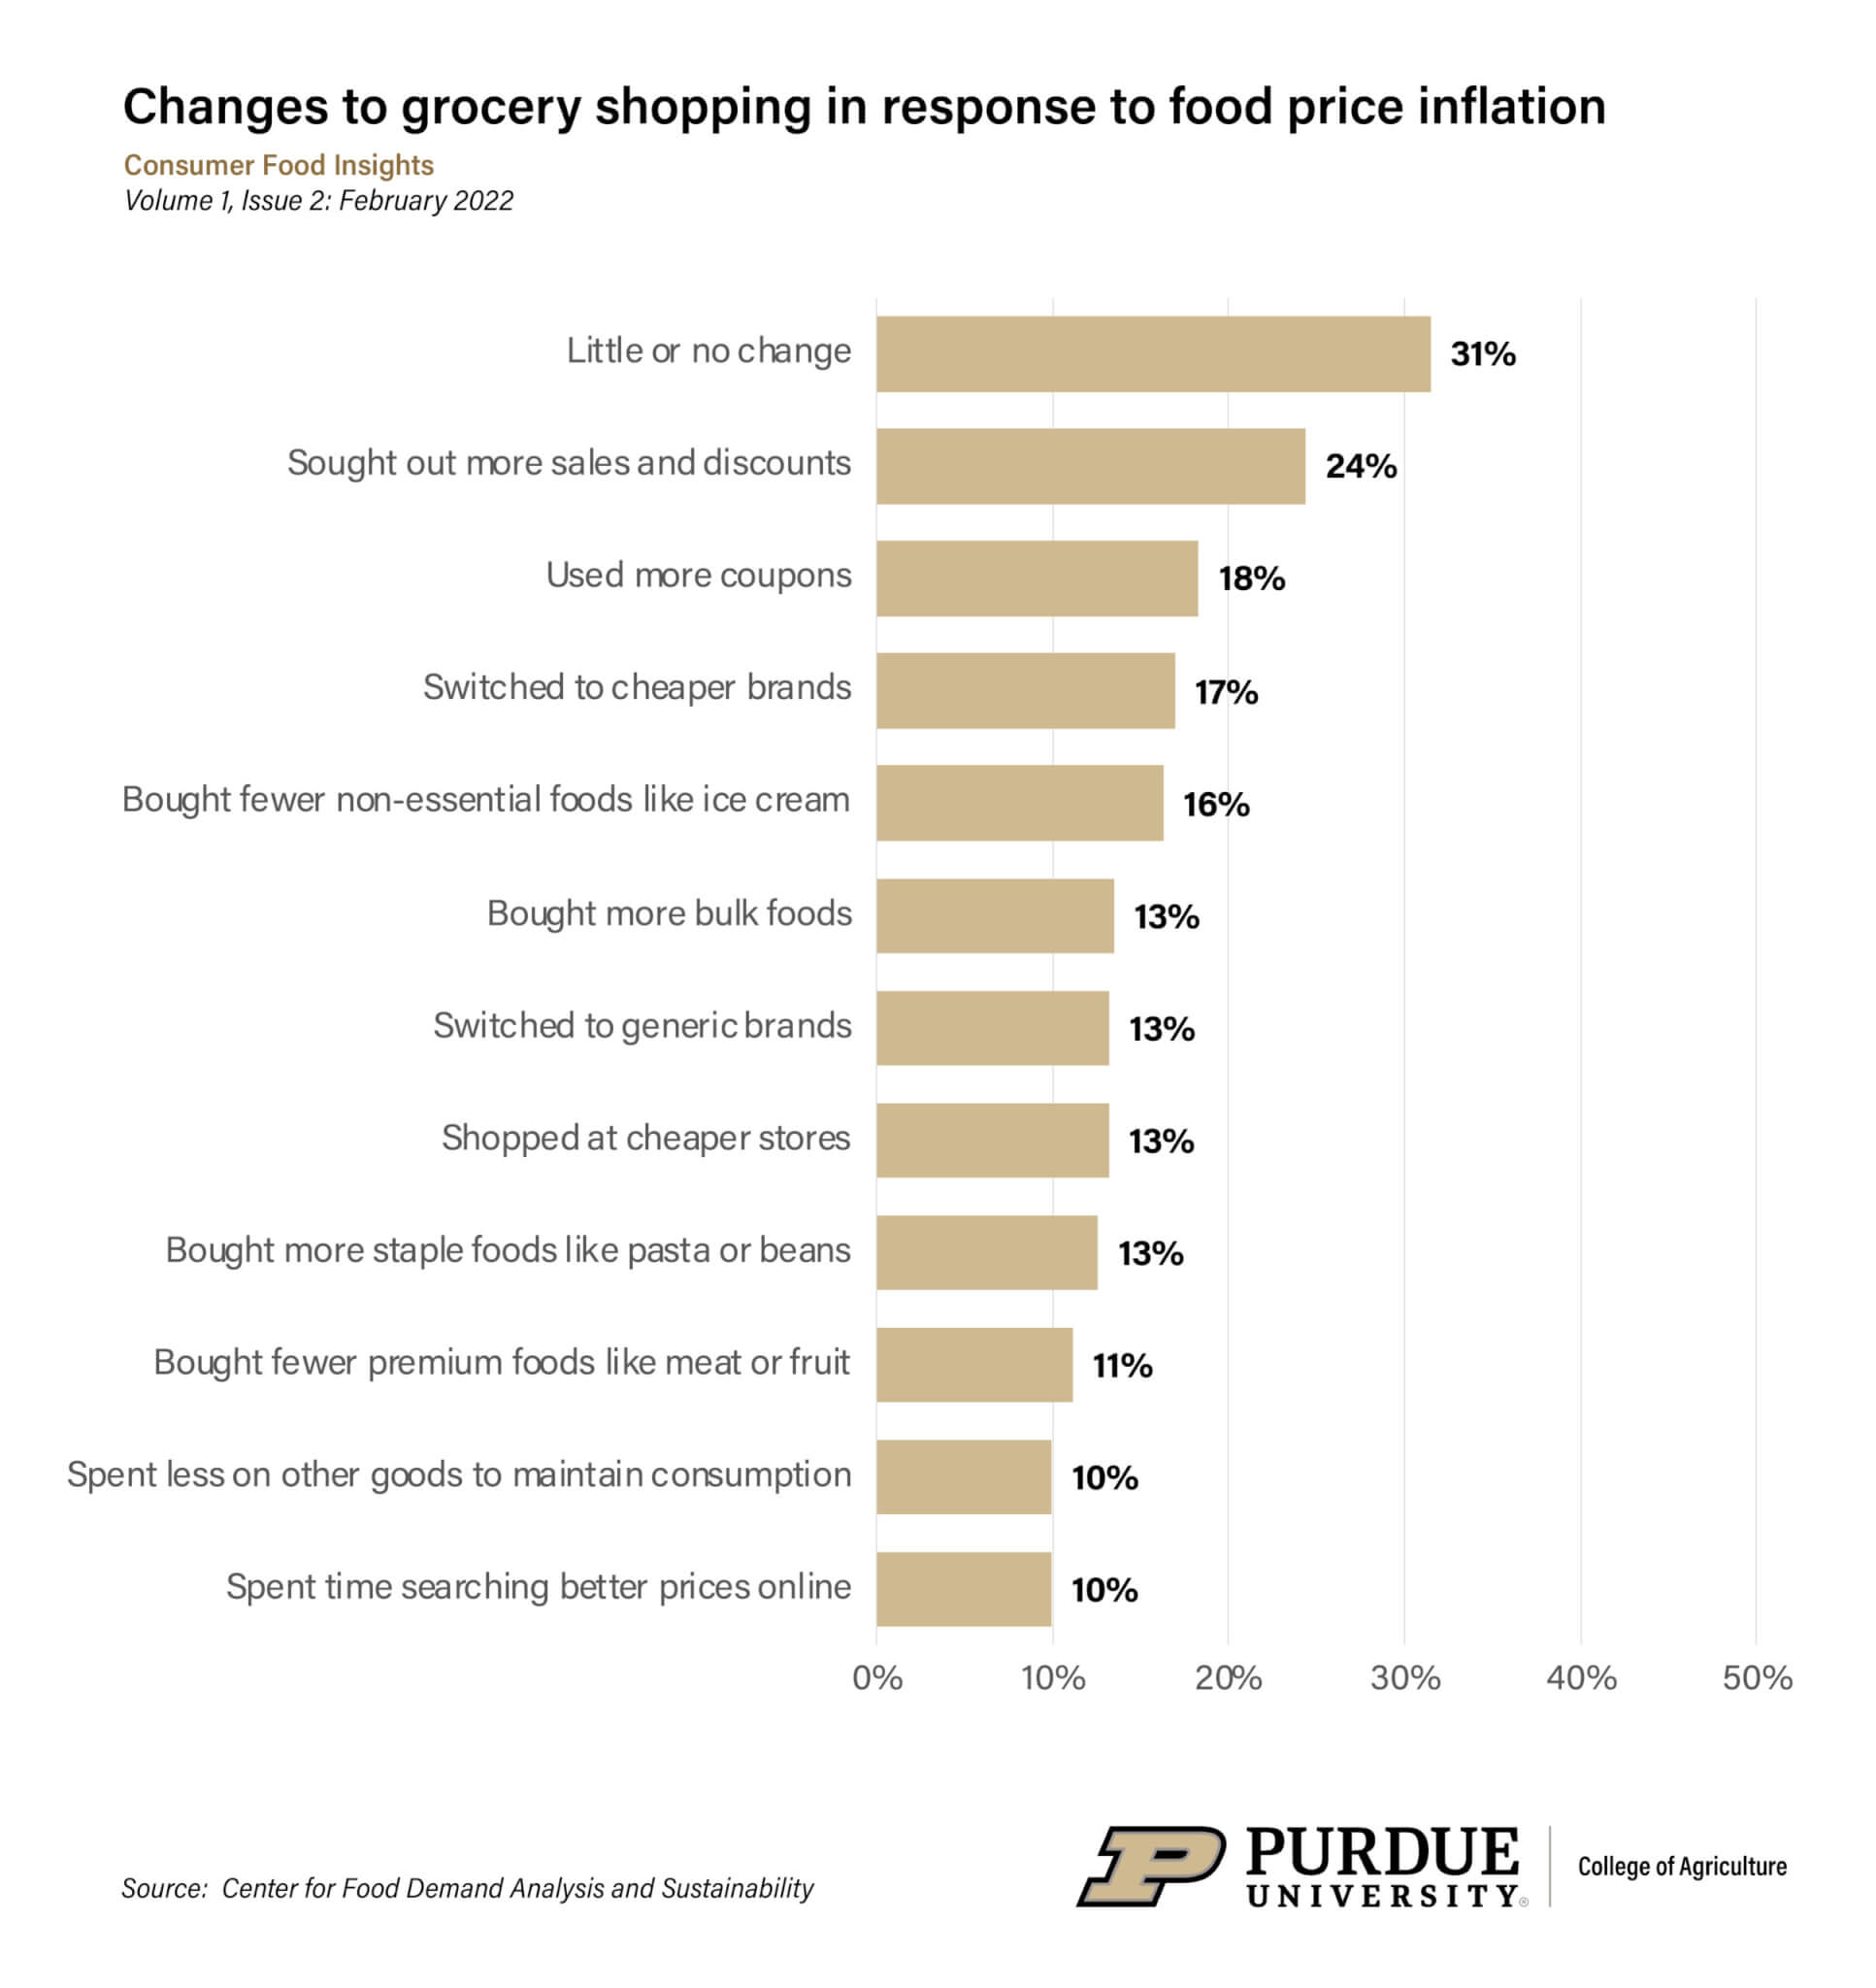 Changes to grocery shopping in response to food price inflation. (Purdue University image/Courtesy of the Center for Food Demand Analysis and Sustainability)